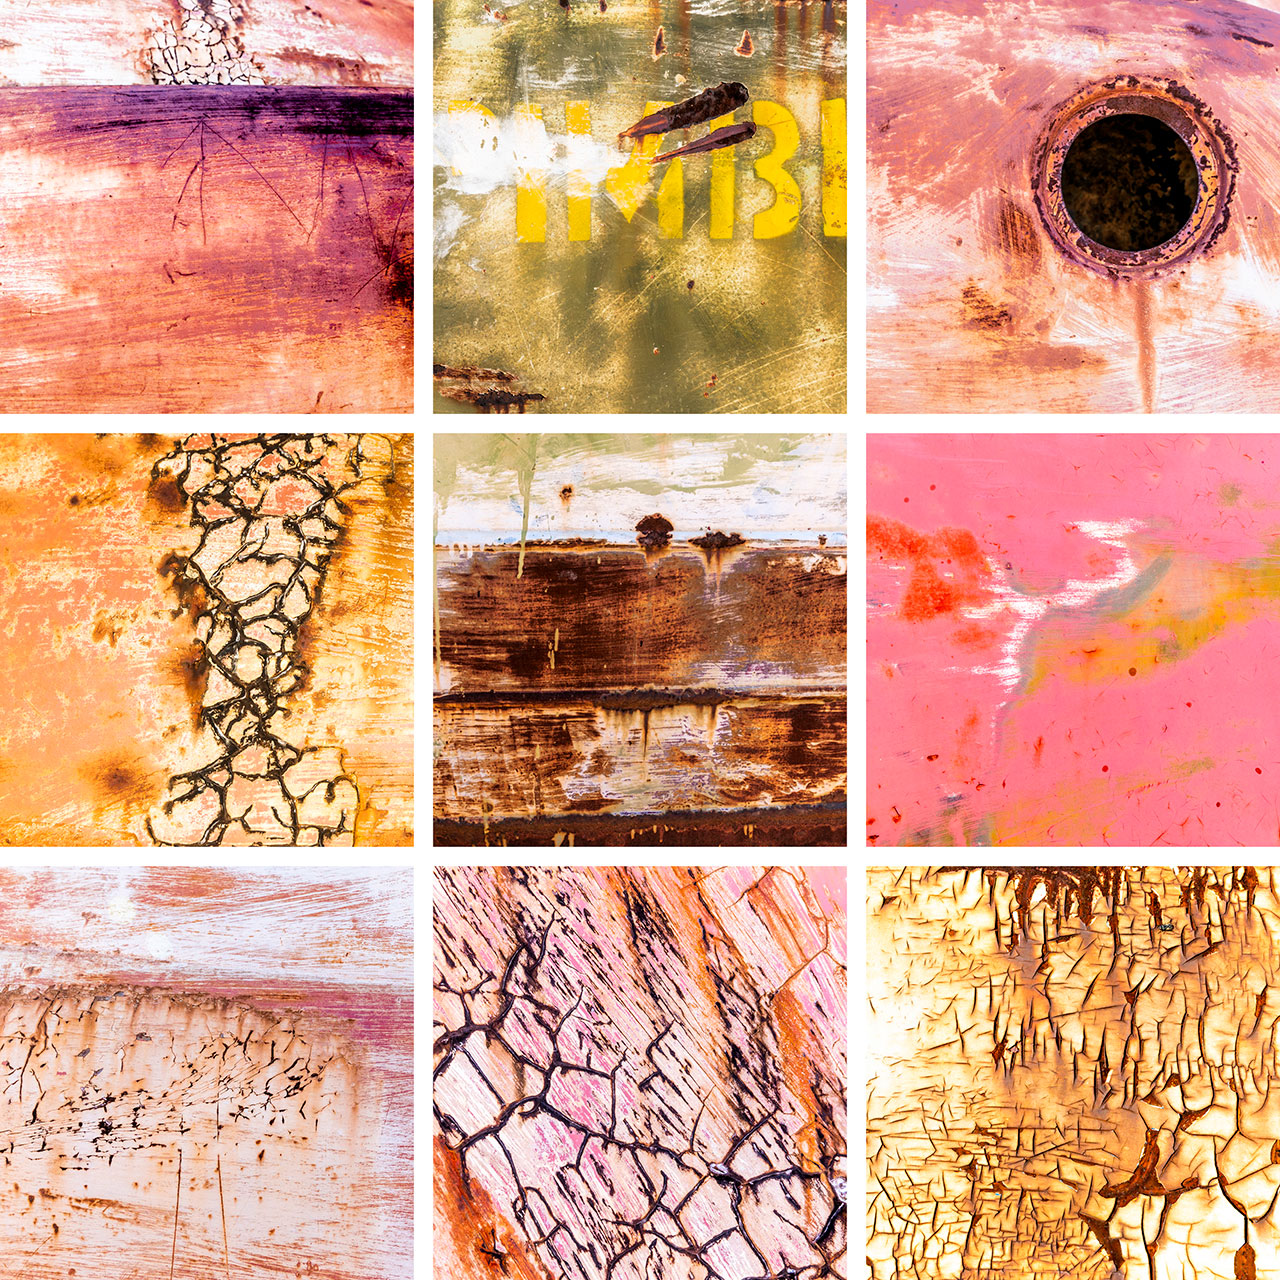 Textures and patterns in metal and paint in the outback